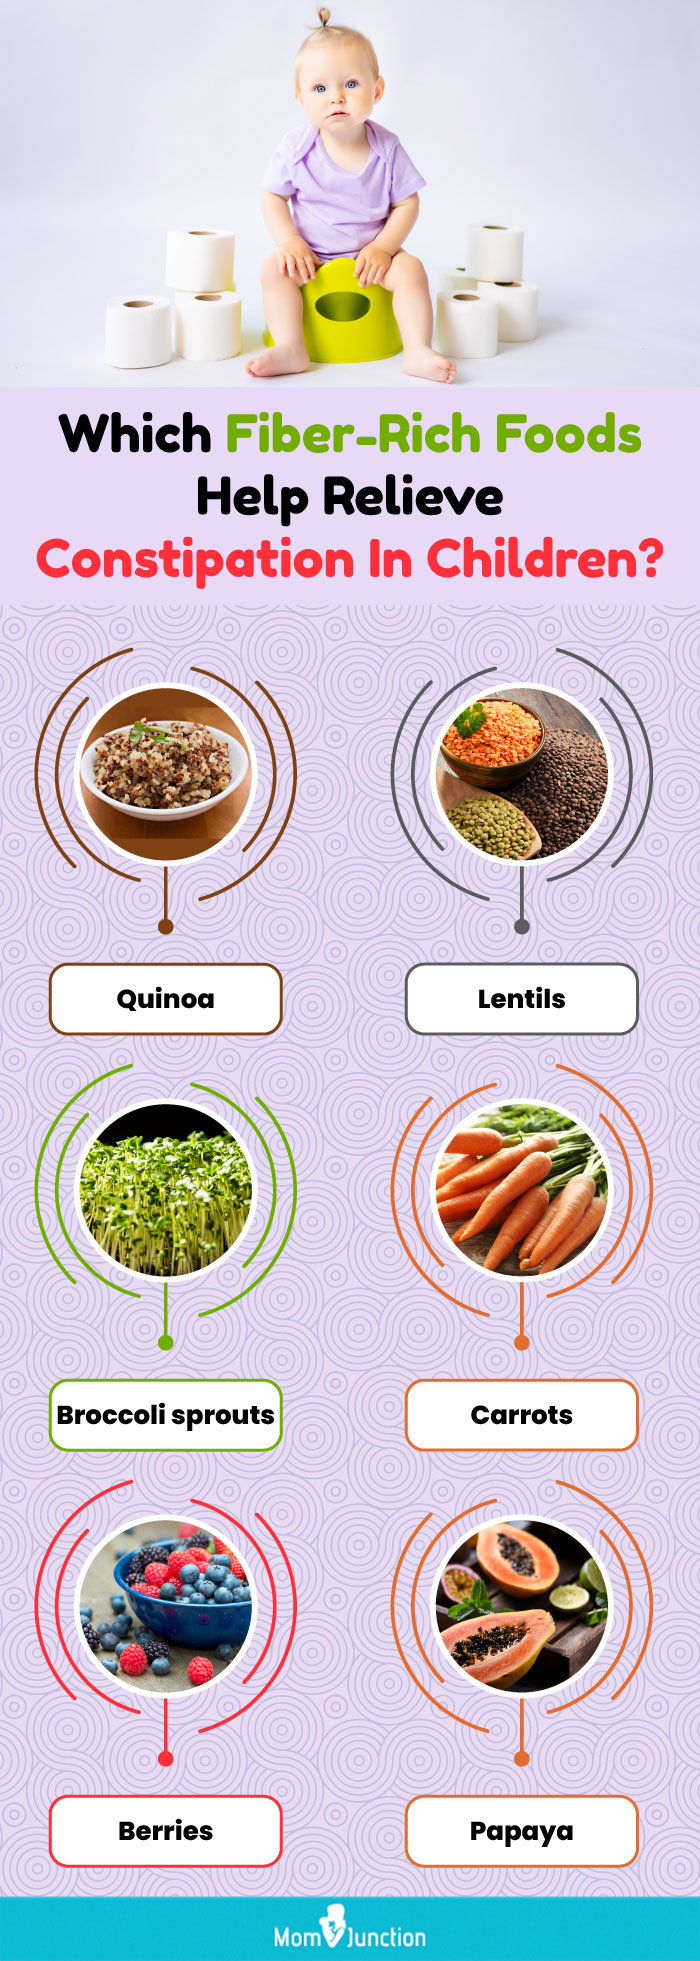 which fiber rich foods help relieve constipation in children (infographic)